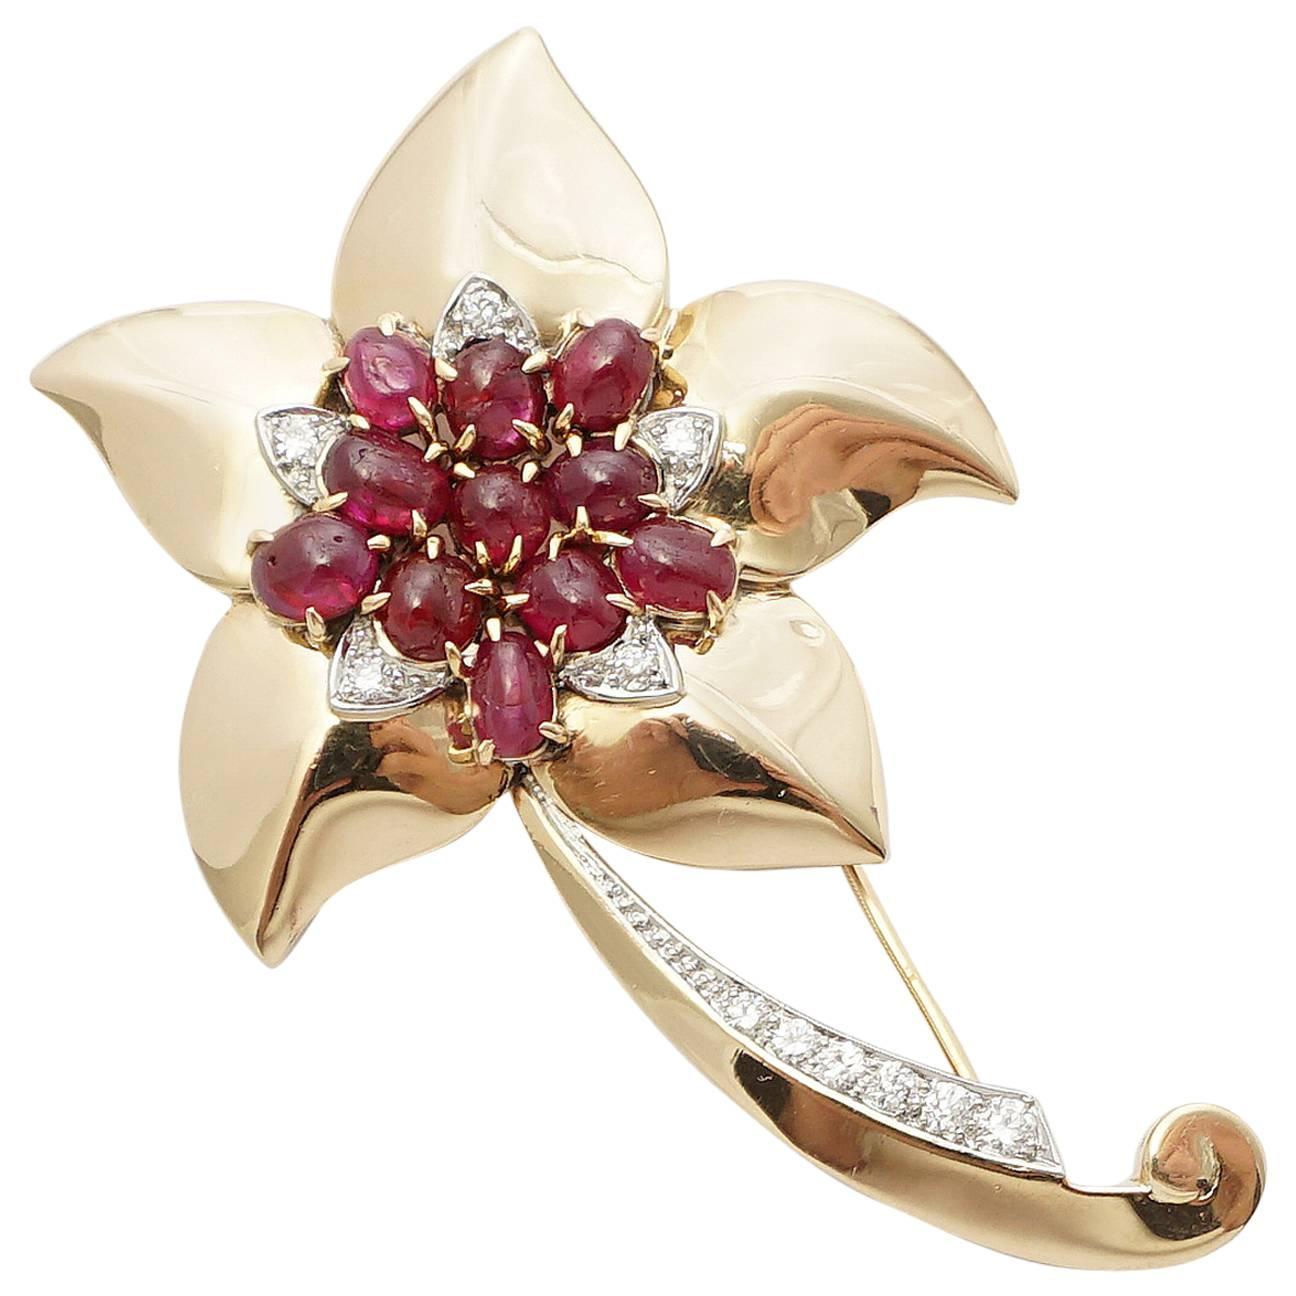 A beautiful retro period mid century Marcus and Company flower form brooch. Adorned with rubies and diamonds, this fantastic brooch is a superb example of the ultra high quality workmanship that Marcus has long been regarded for.

Featuring a total